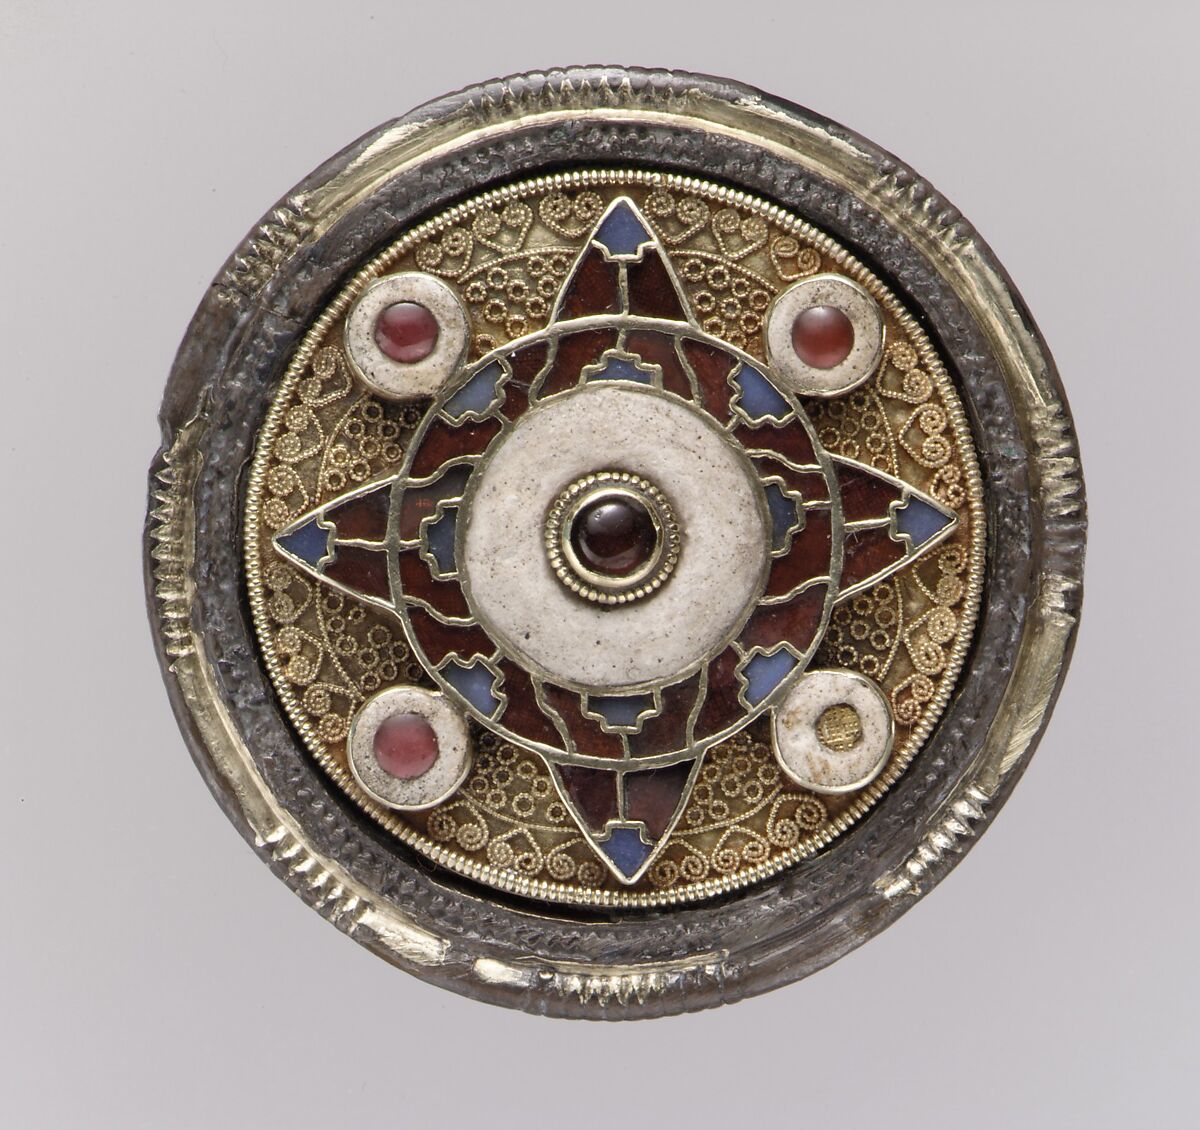 Disk Brooch, Gold with garnets, glass, and niello, Anglo-Saxon 